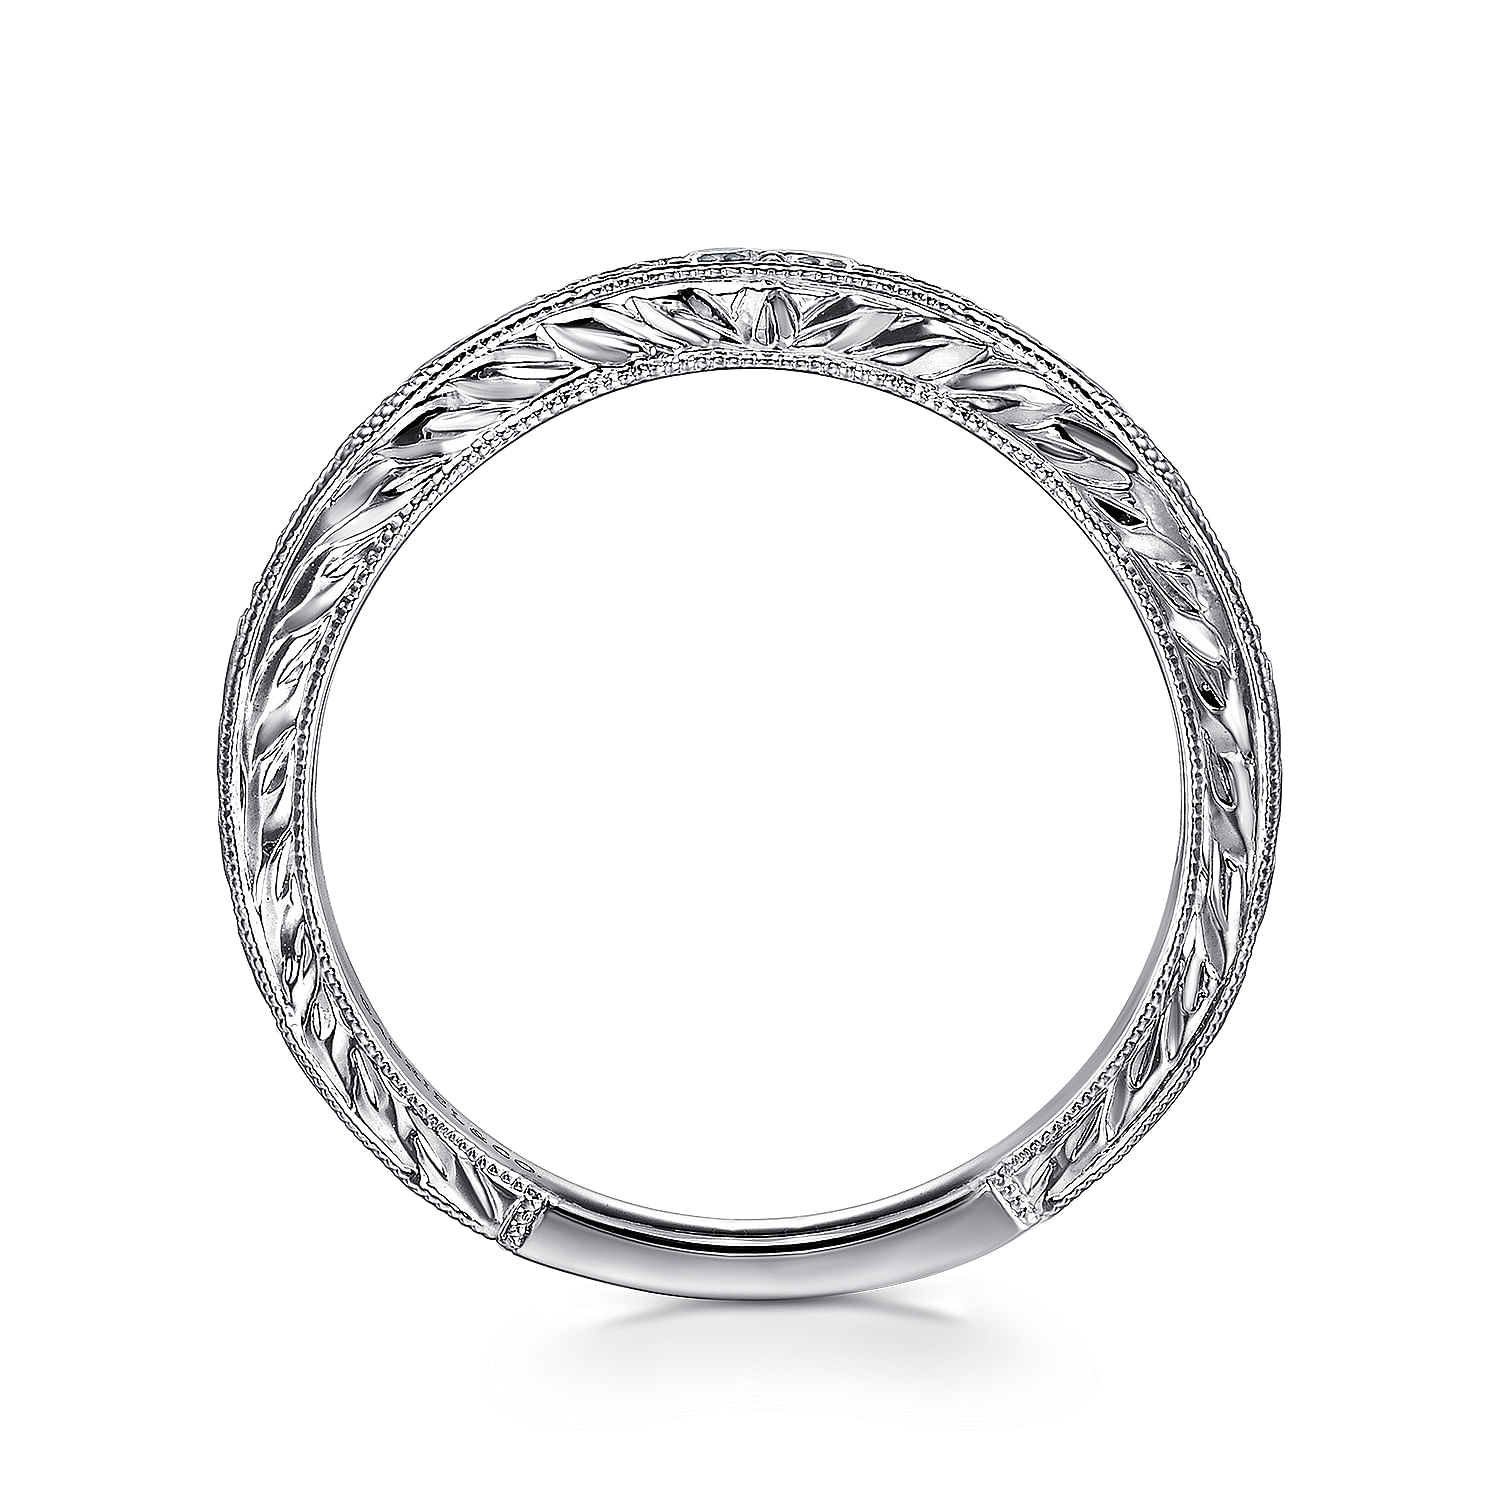 Provence - Vintage Inspired  Curved 14K White Gold Micro Pave Diamond Wedding Band with Engraving - 0.25 ct - Shot 2